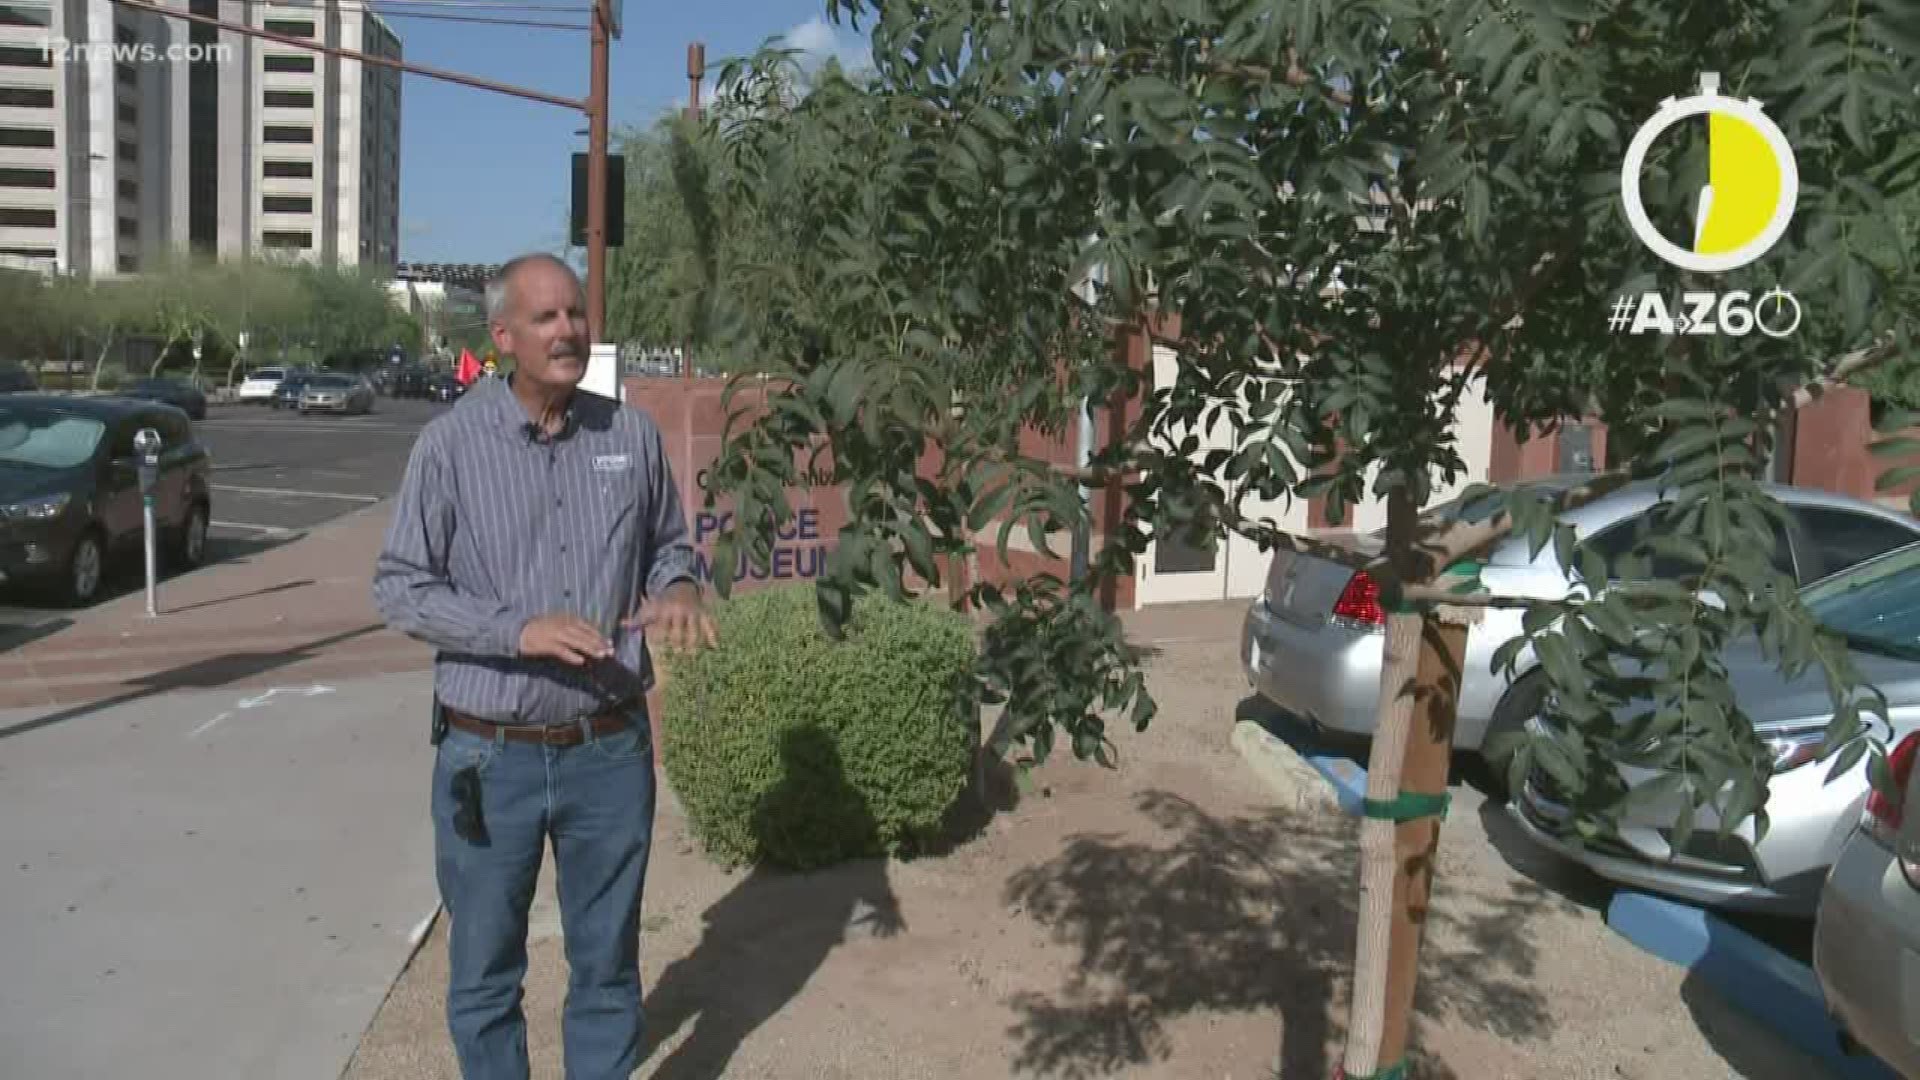 During the extreme heat, we're all looking for ways to stay cool. Colleen Sikora shows us some cool ways they're adding more shade in downtown Phoenix.